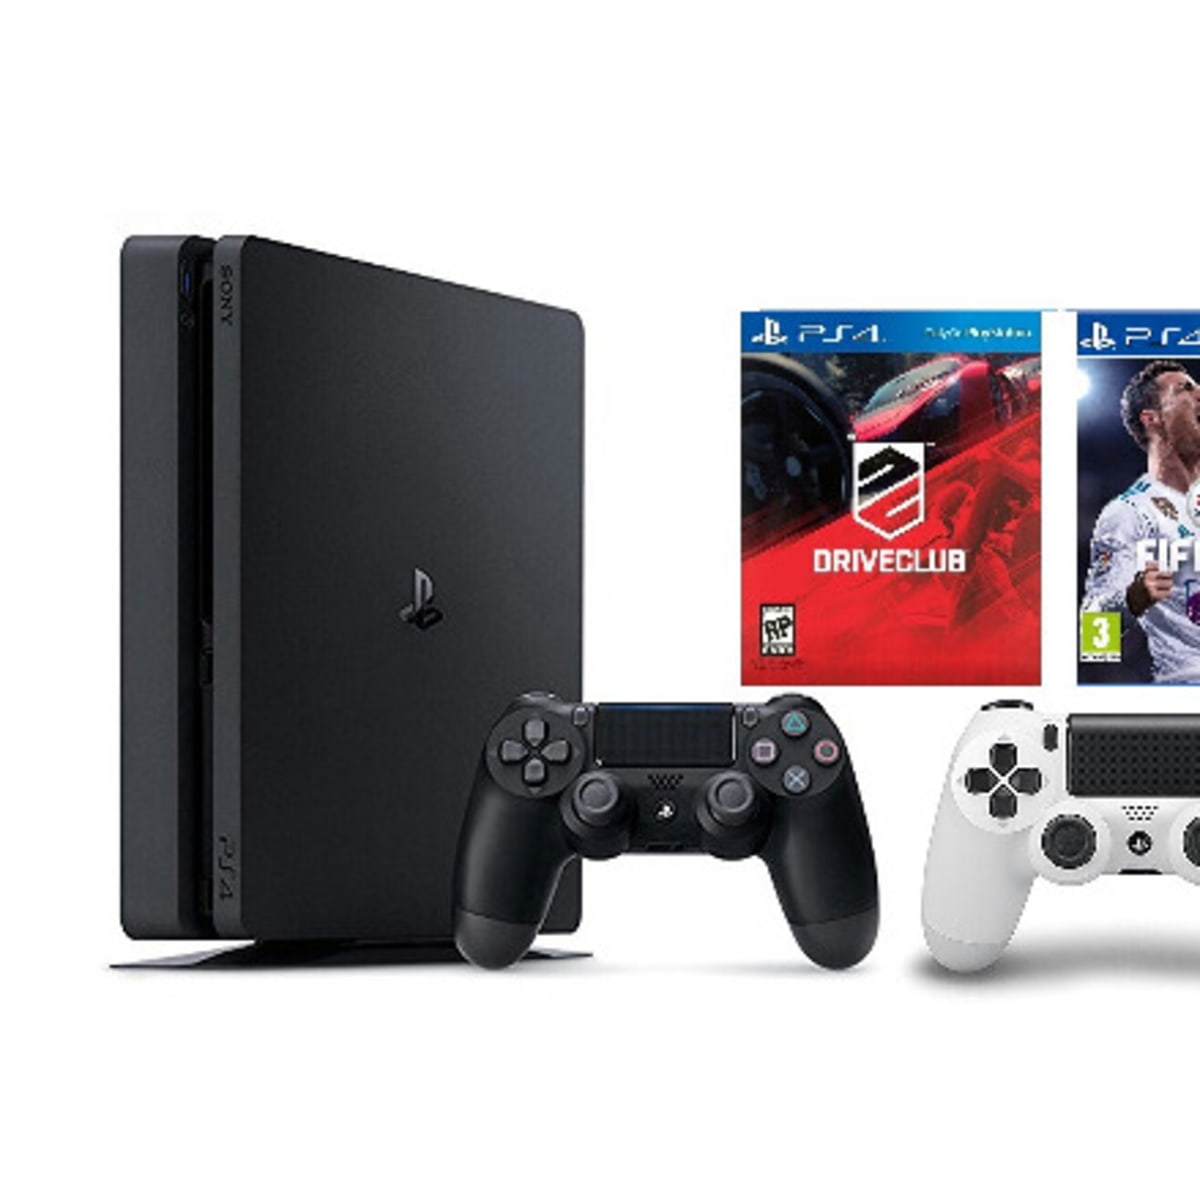 margen job Ritual Sony Ps4 Slim Console +Fifa 18 + Drive club + Extra Controller | Konga  Online Shopping